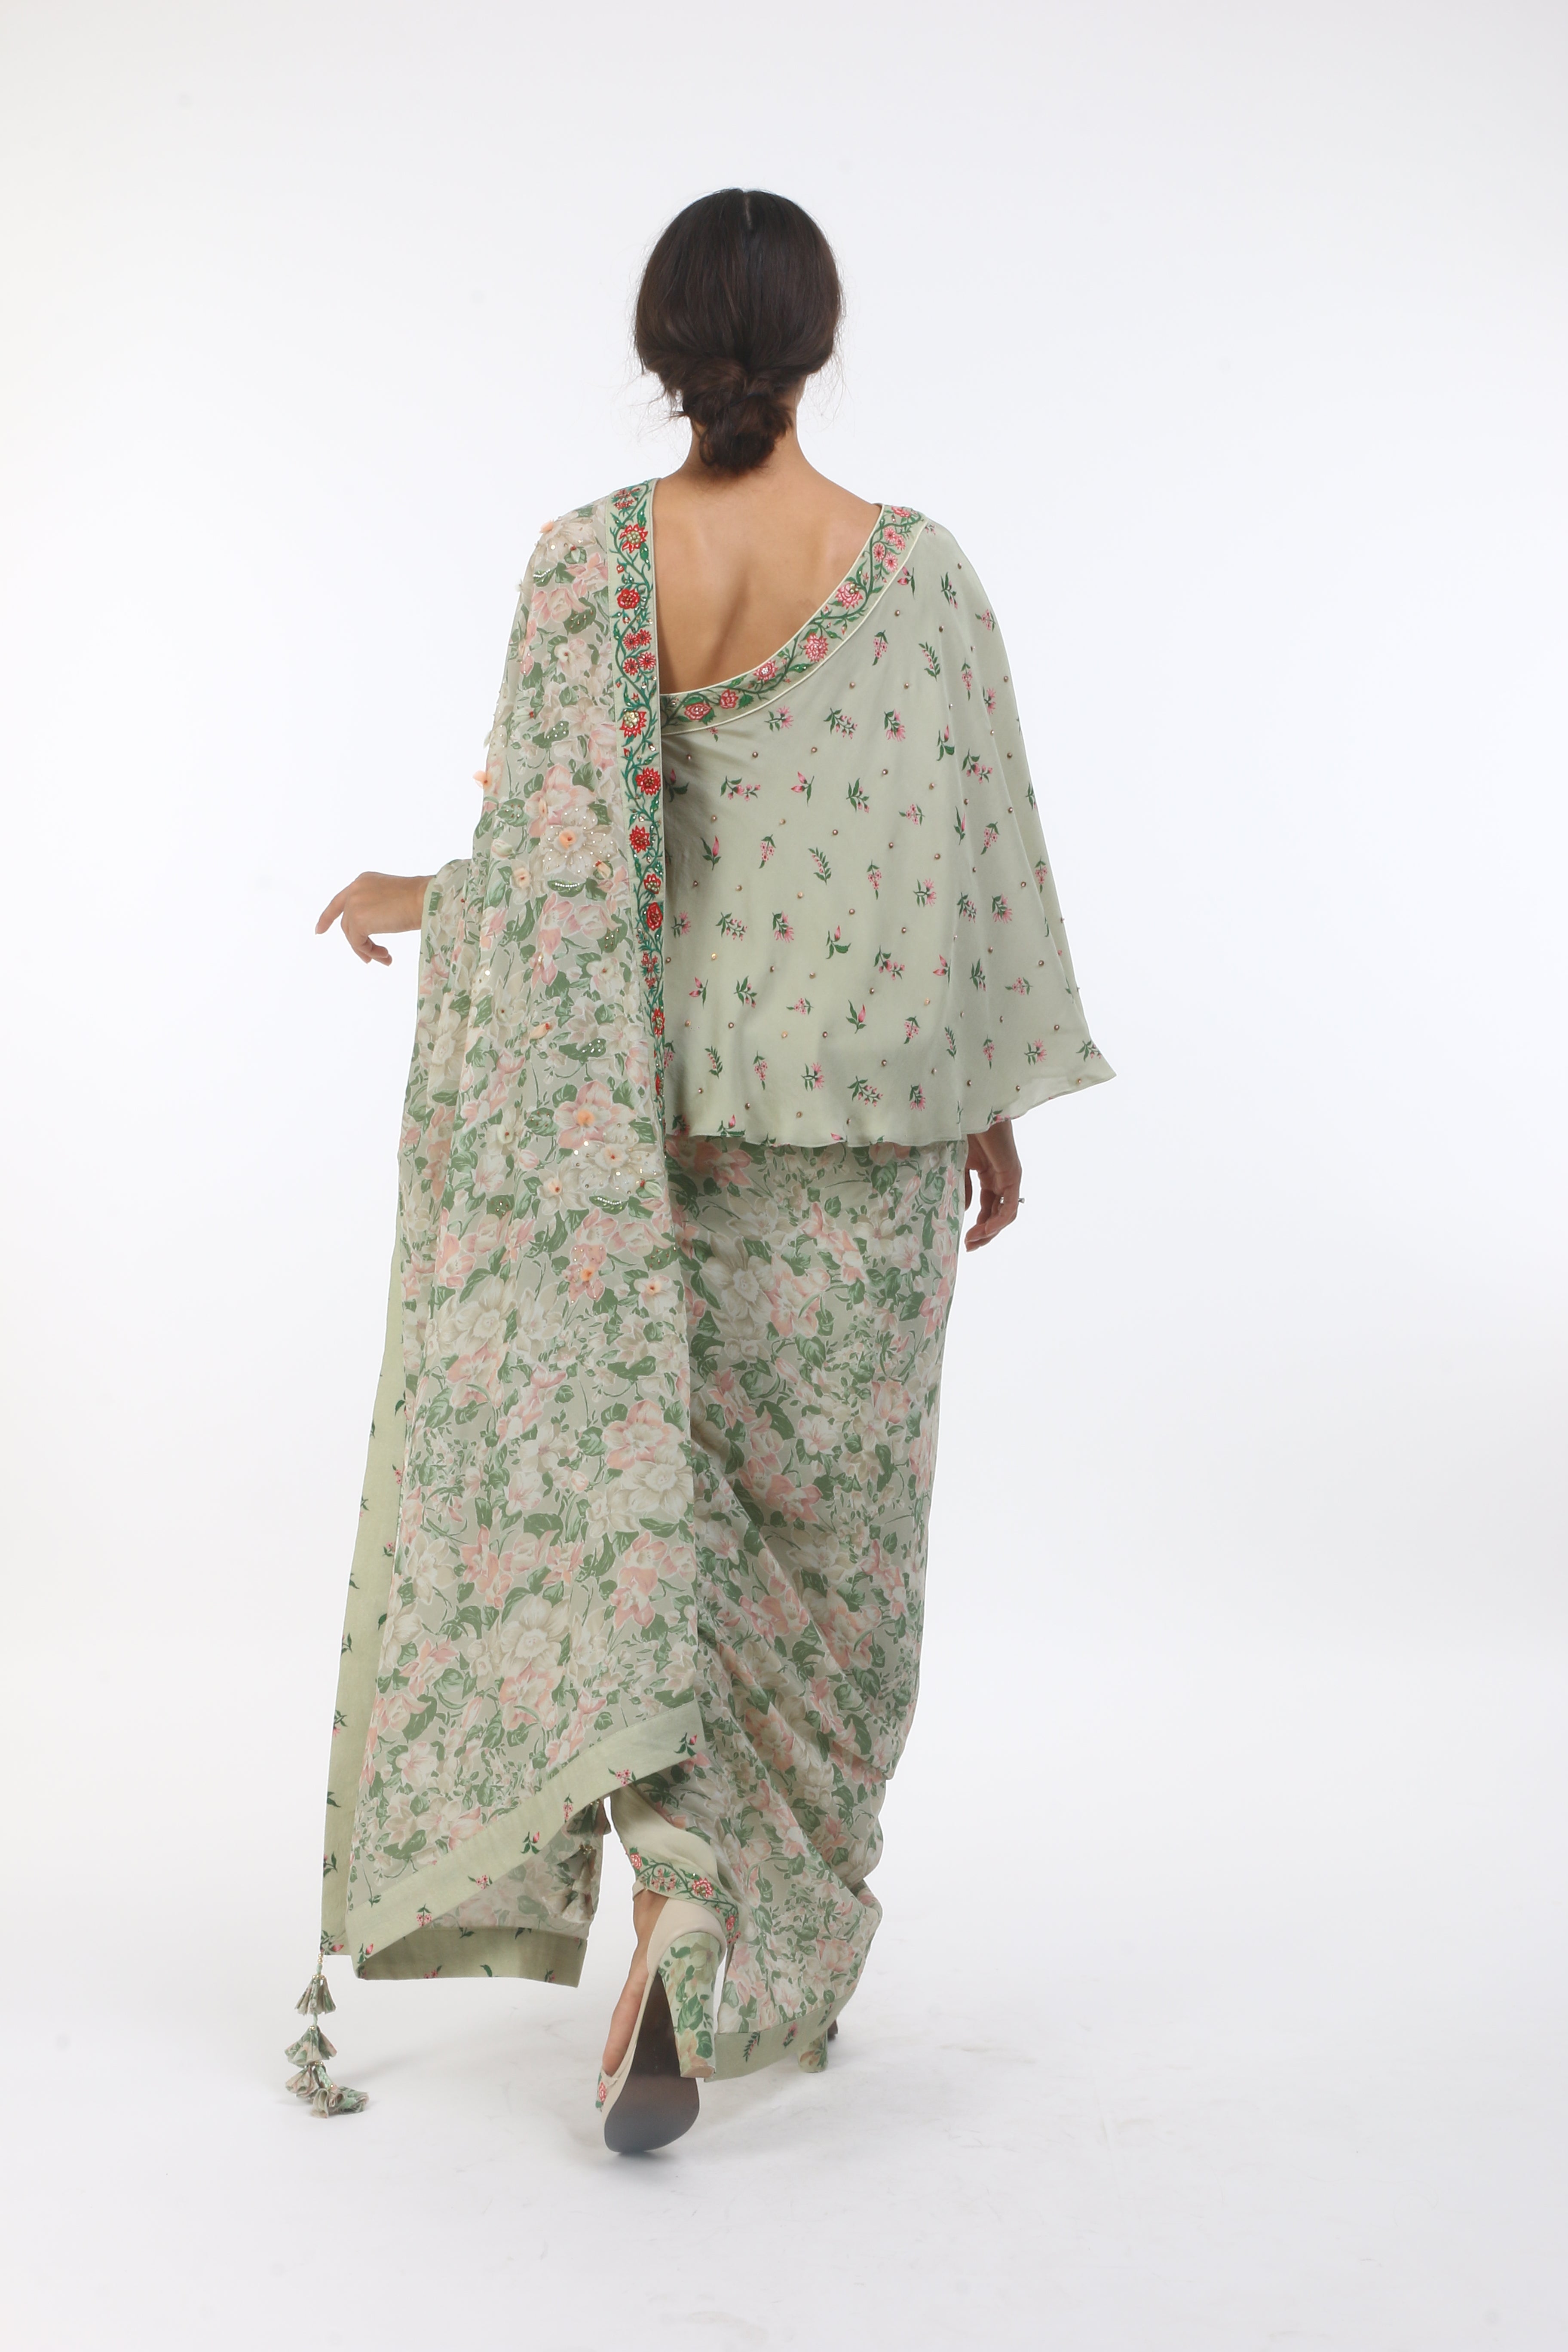 printed and embellished crepe dhoti saree with mumtaz bel border and bouquet printed one shoulder blouse.